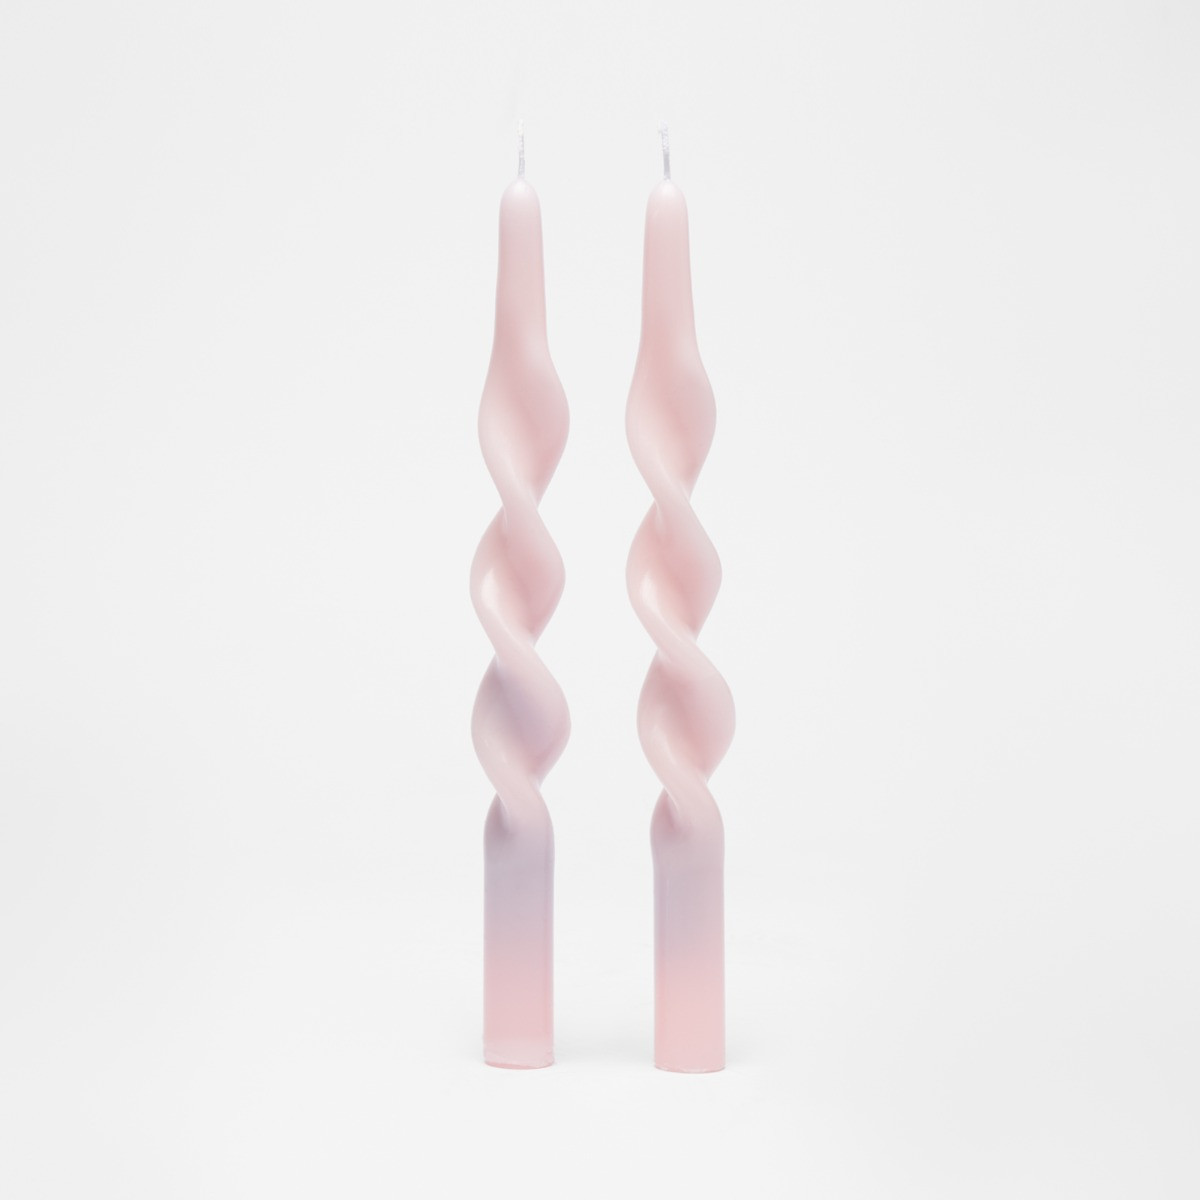 OHS Twisted Taper Candlestick, Blush - Set of 2>